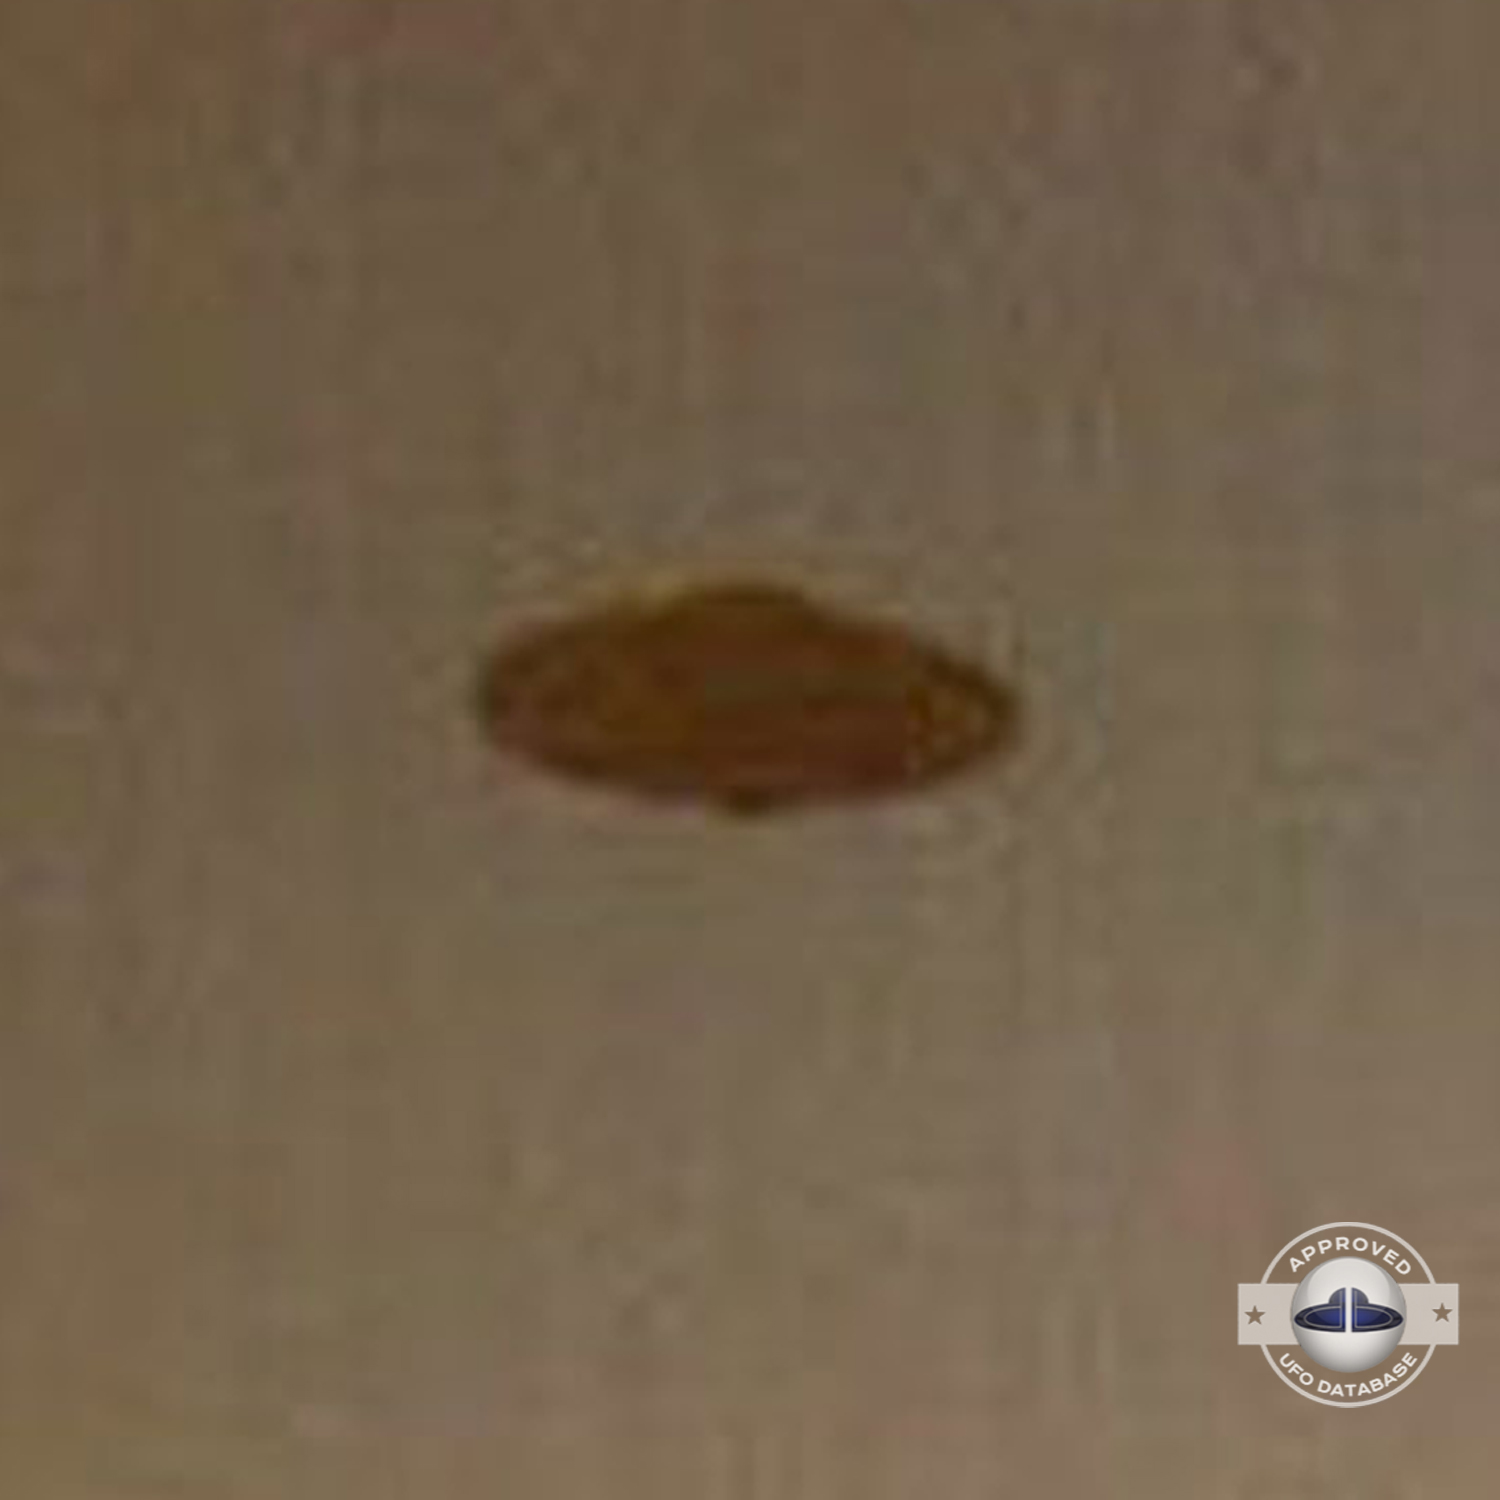 The UFO has a Saturn shape and can be seen at nightfall over a house UFO Picture #65-4